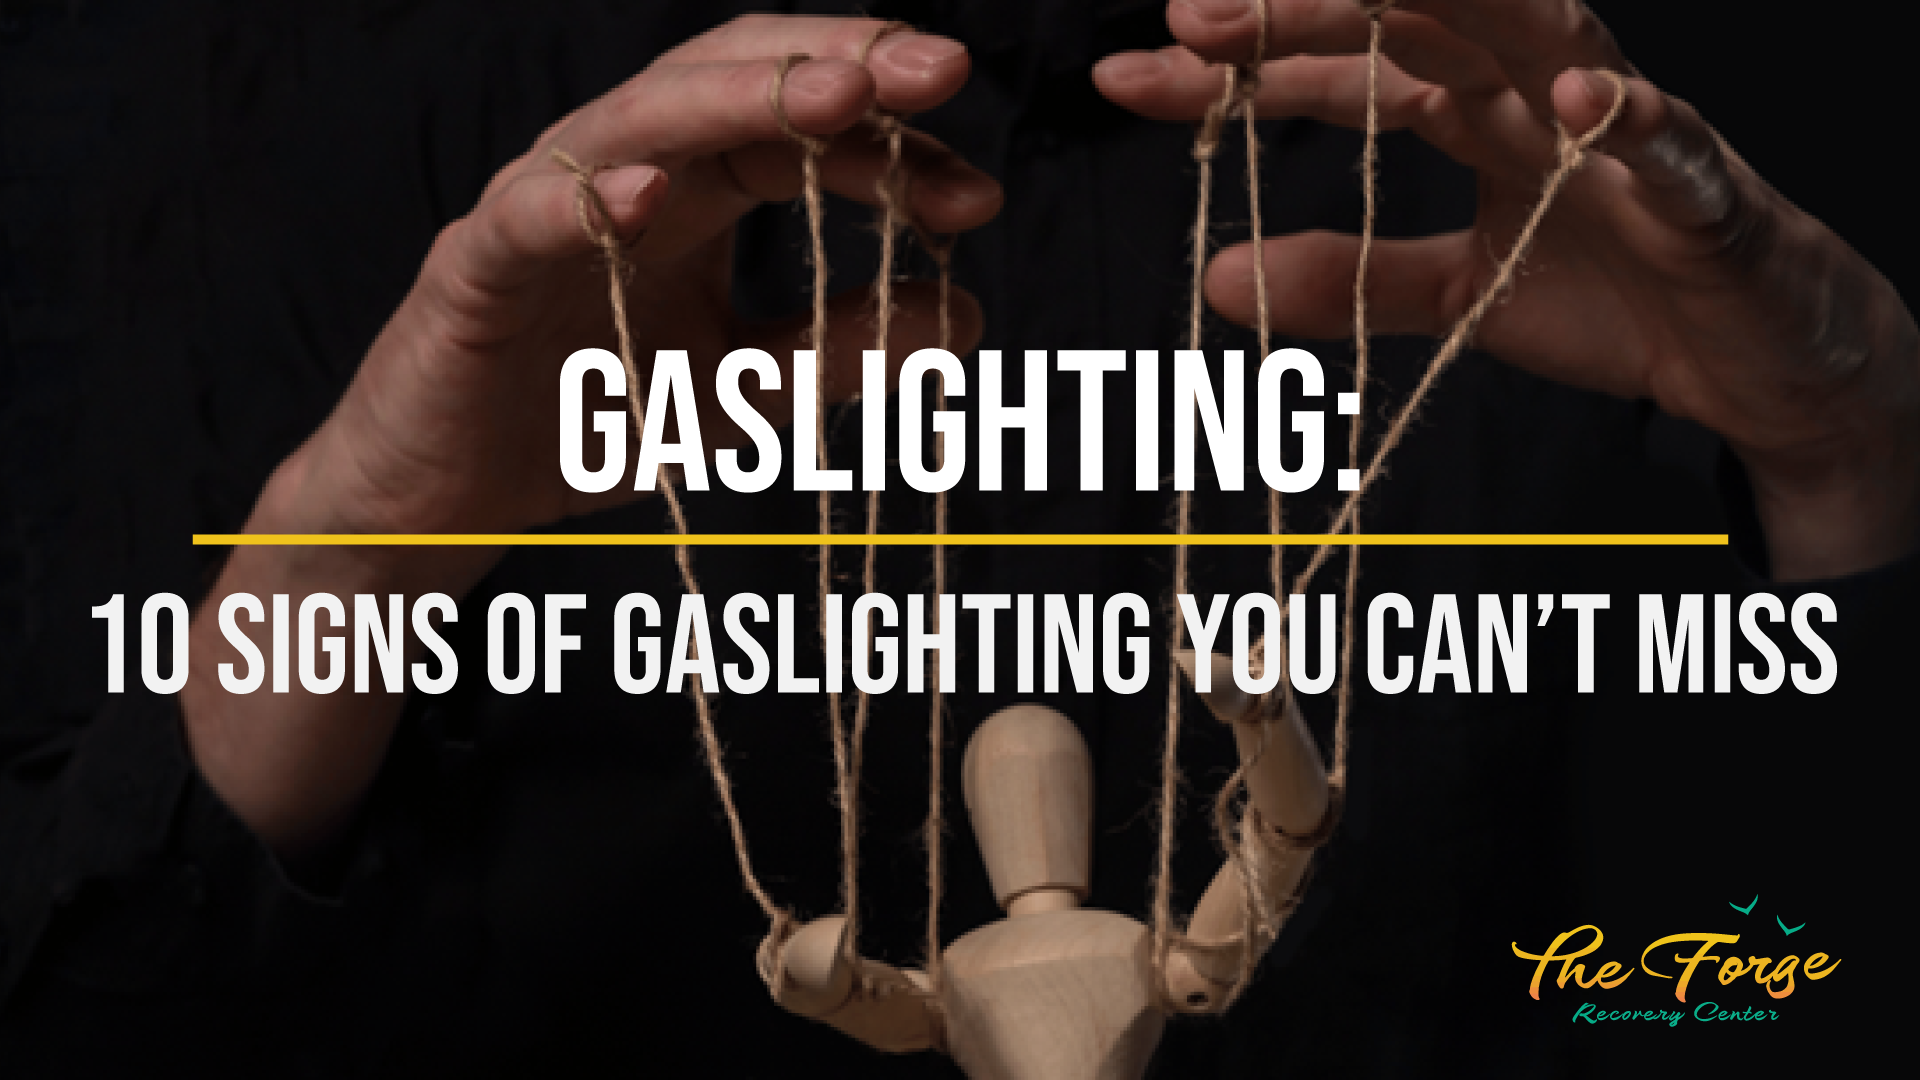 Gaslighting: 10 Signs of Gaslighting To Recognize & Defend Against